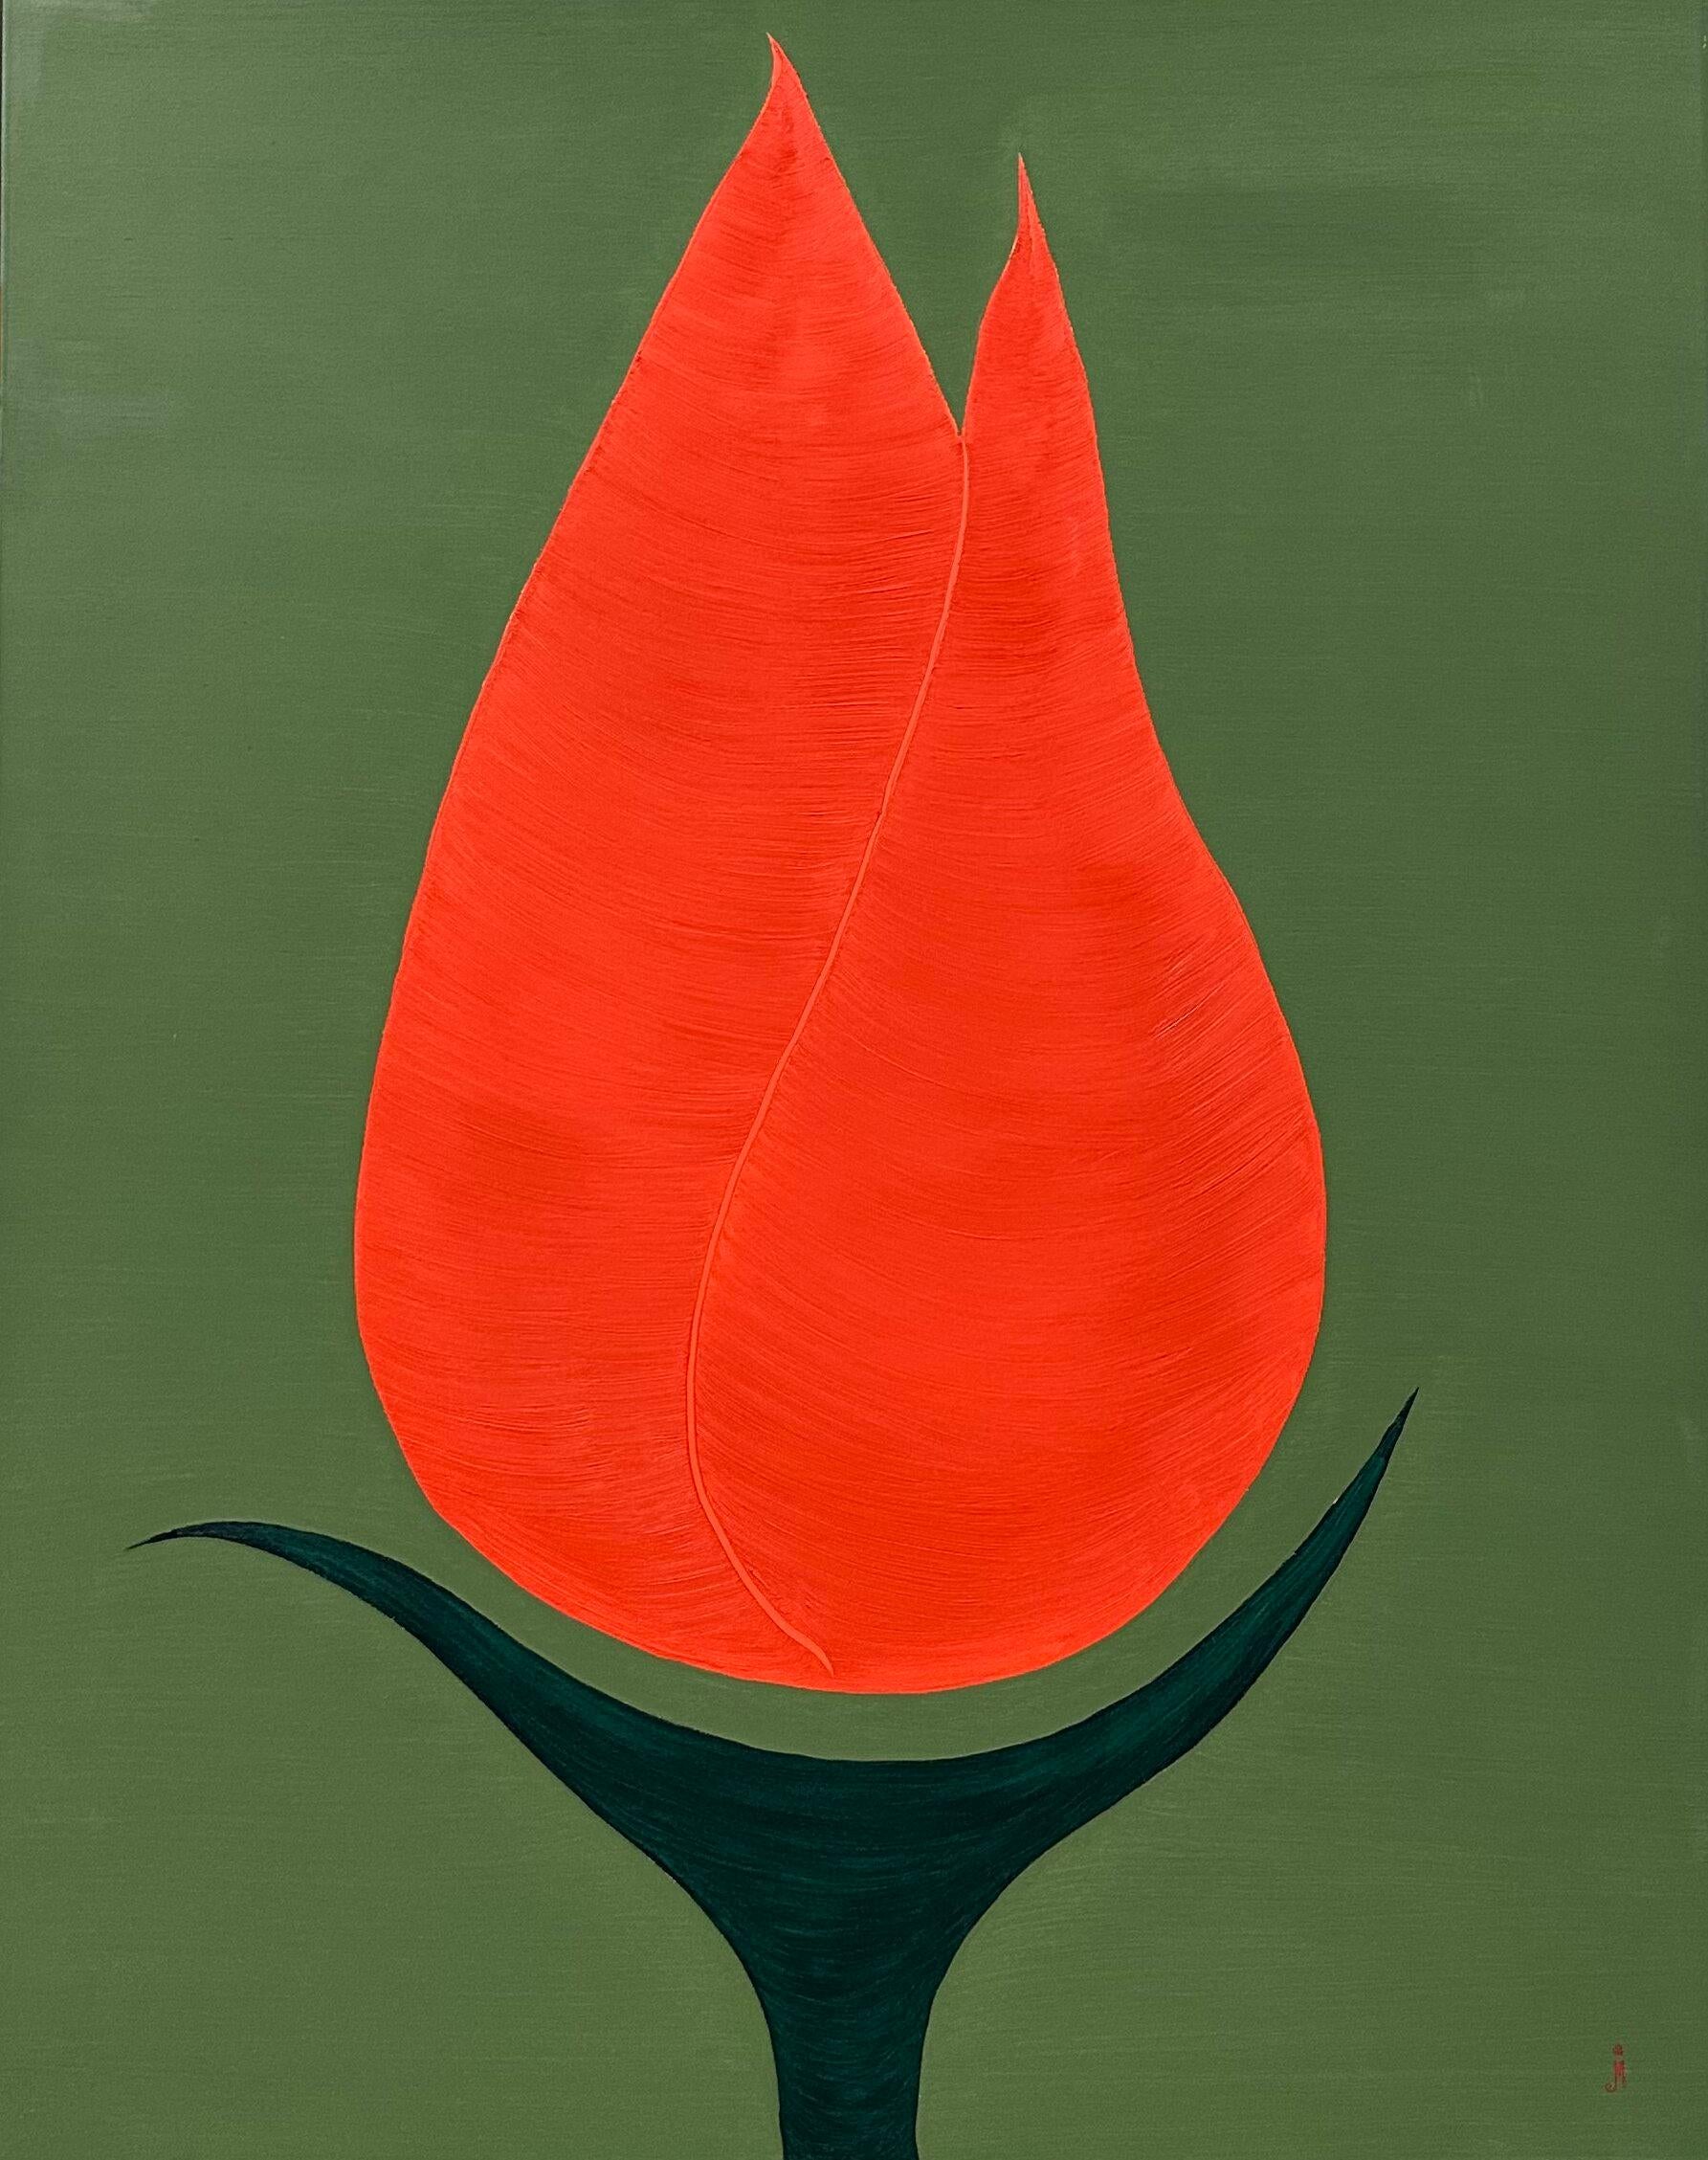 Red Tulip - Painting by J. Oscar Molina